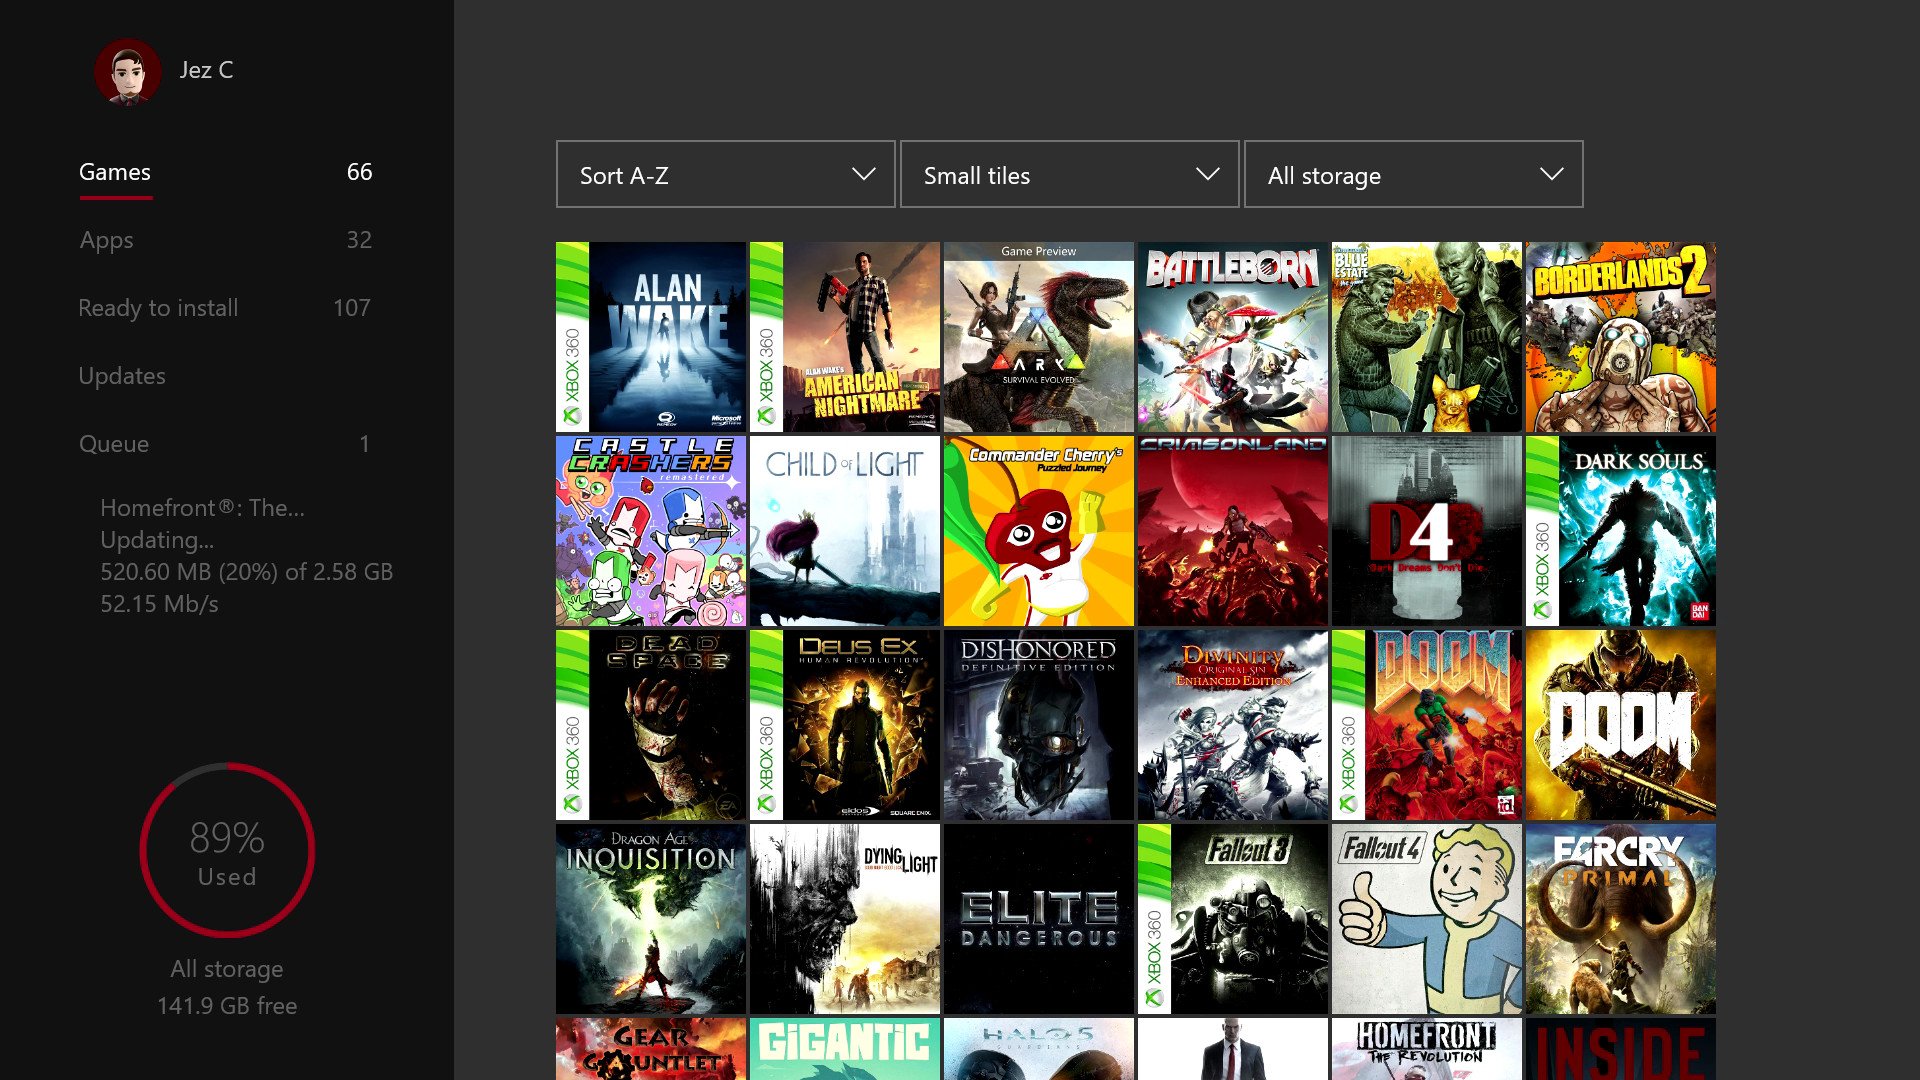 xbox-games-apps-games.jpg